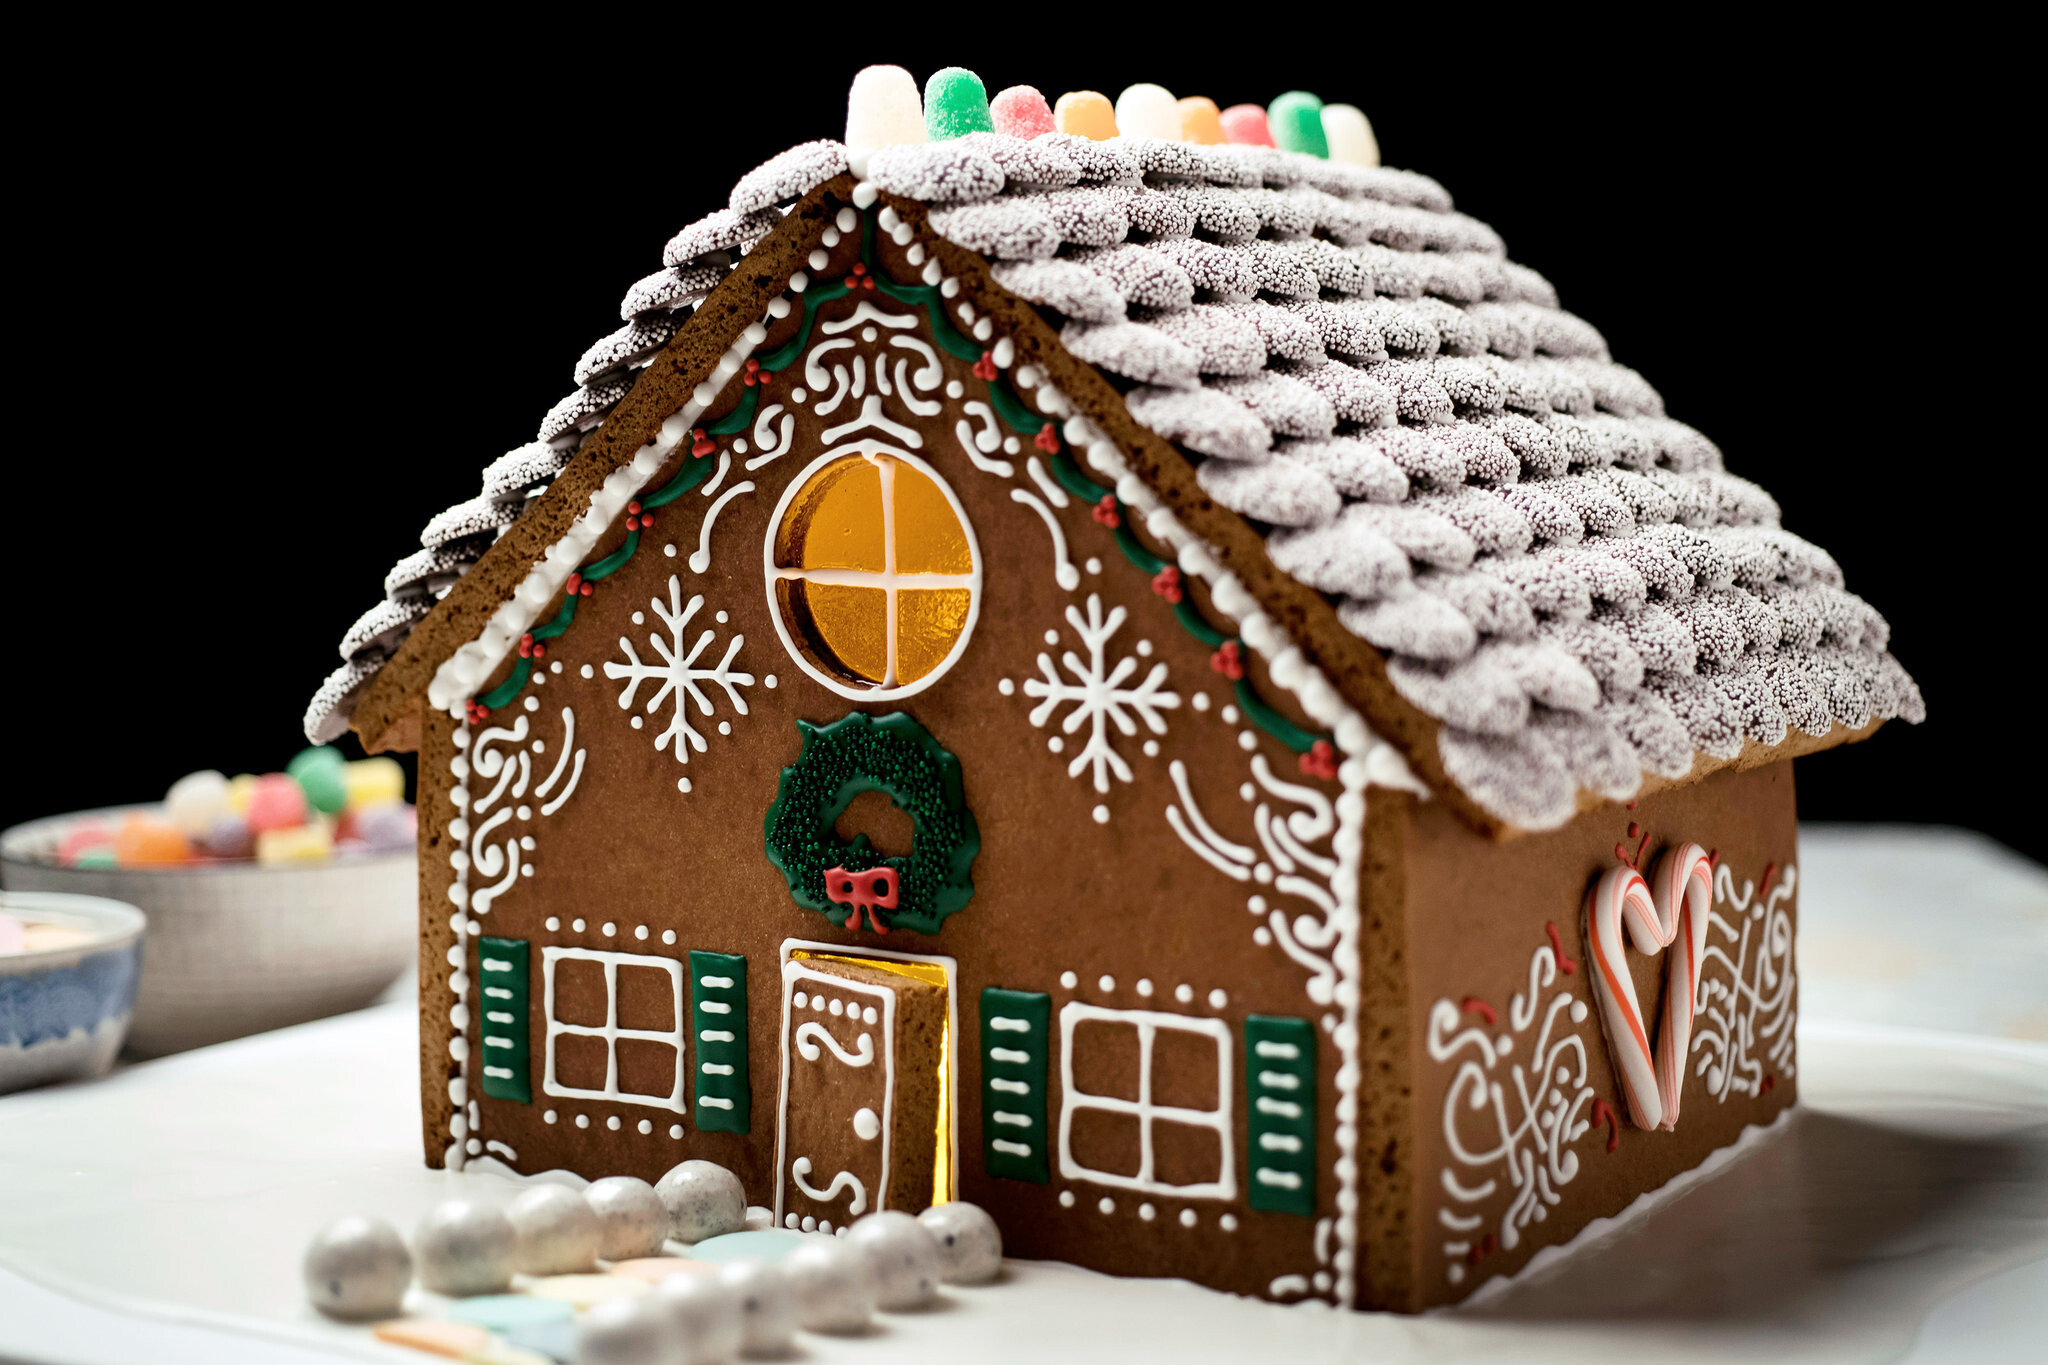 Gingerbread House: House decorated with royal icing and candies, Sprinkles, Edible pearls, Christmas ornaments. 2050x1370 HD Background.